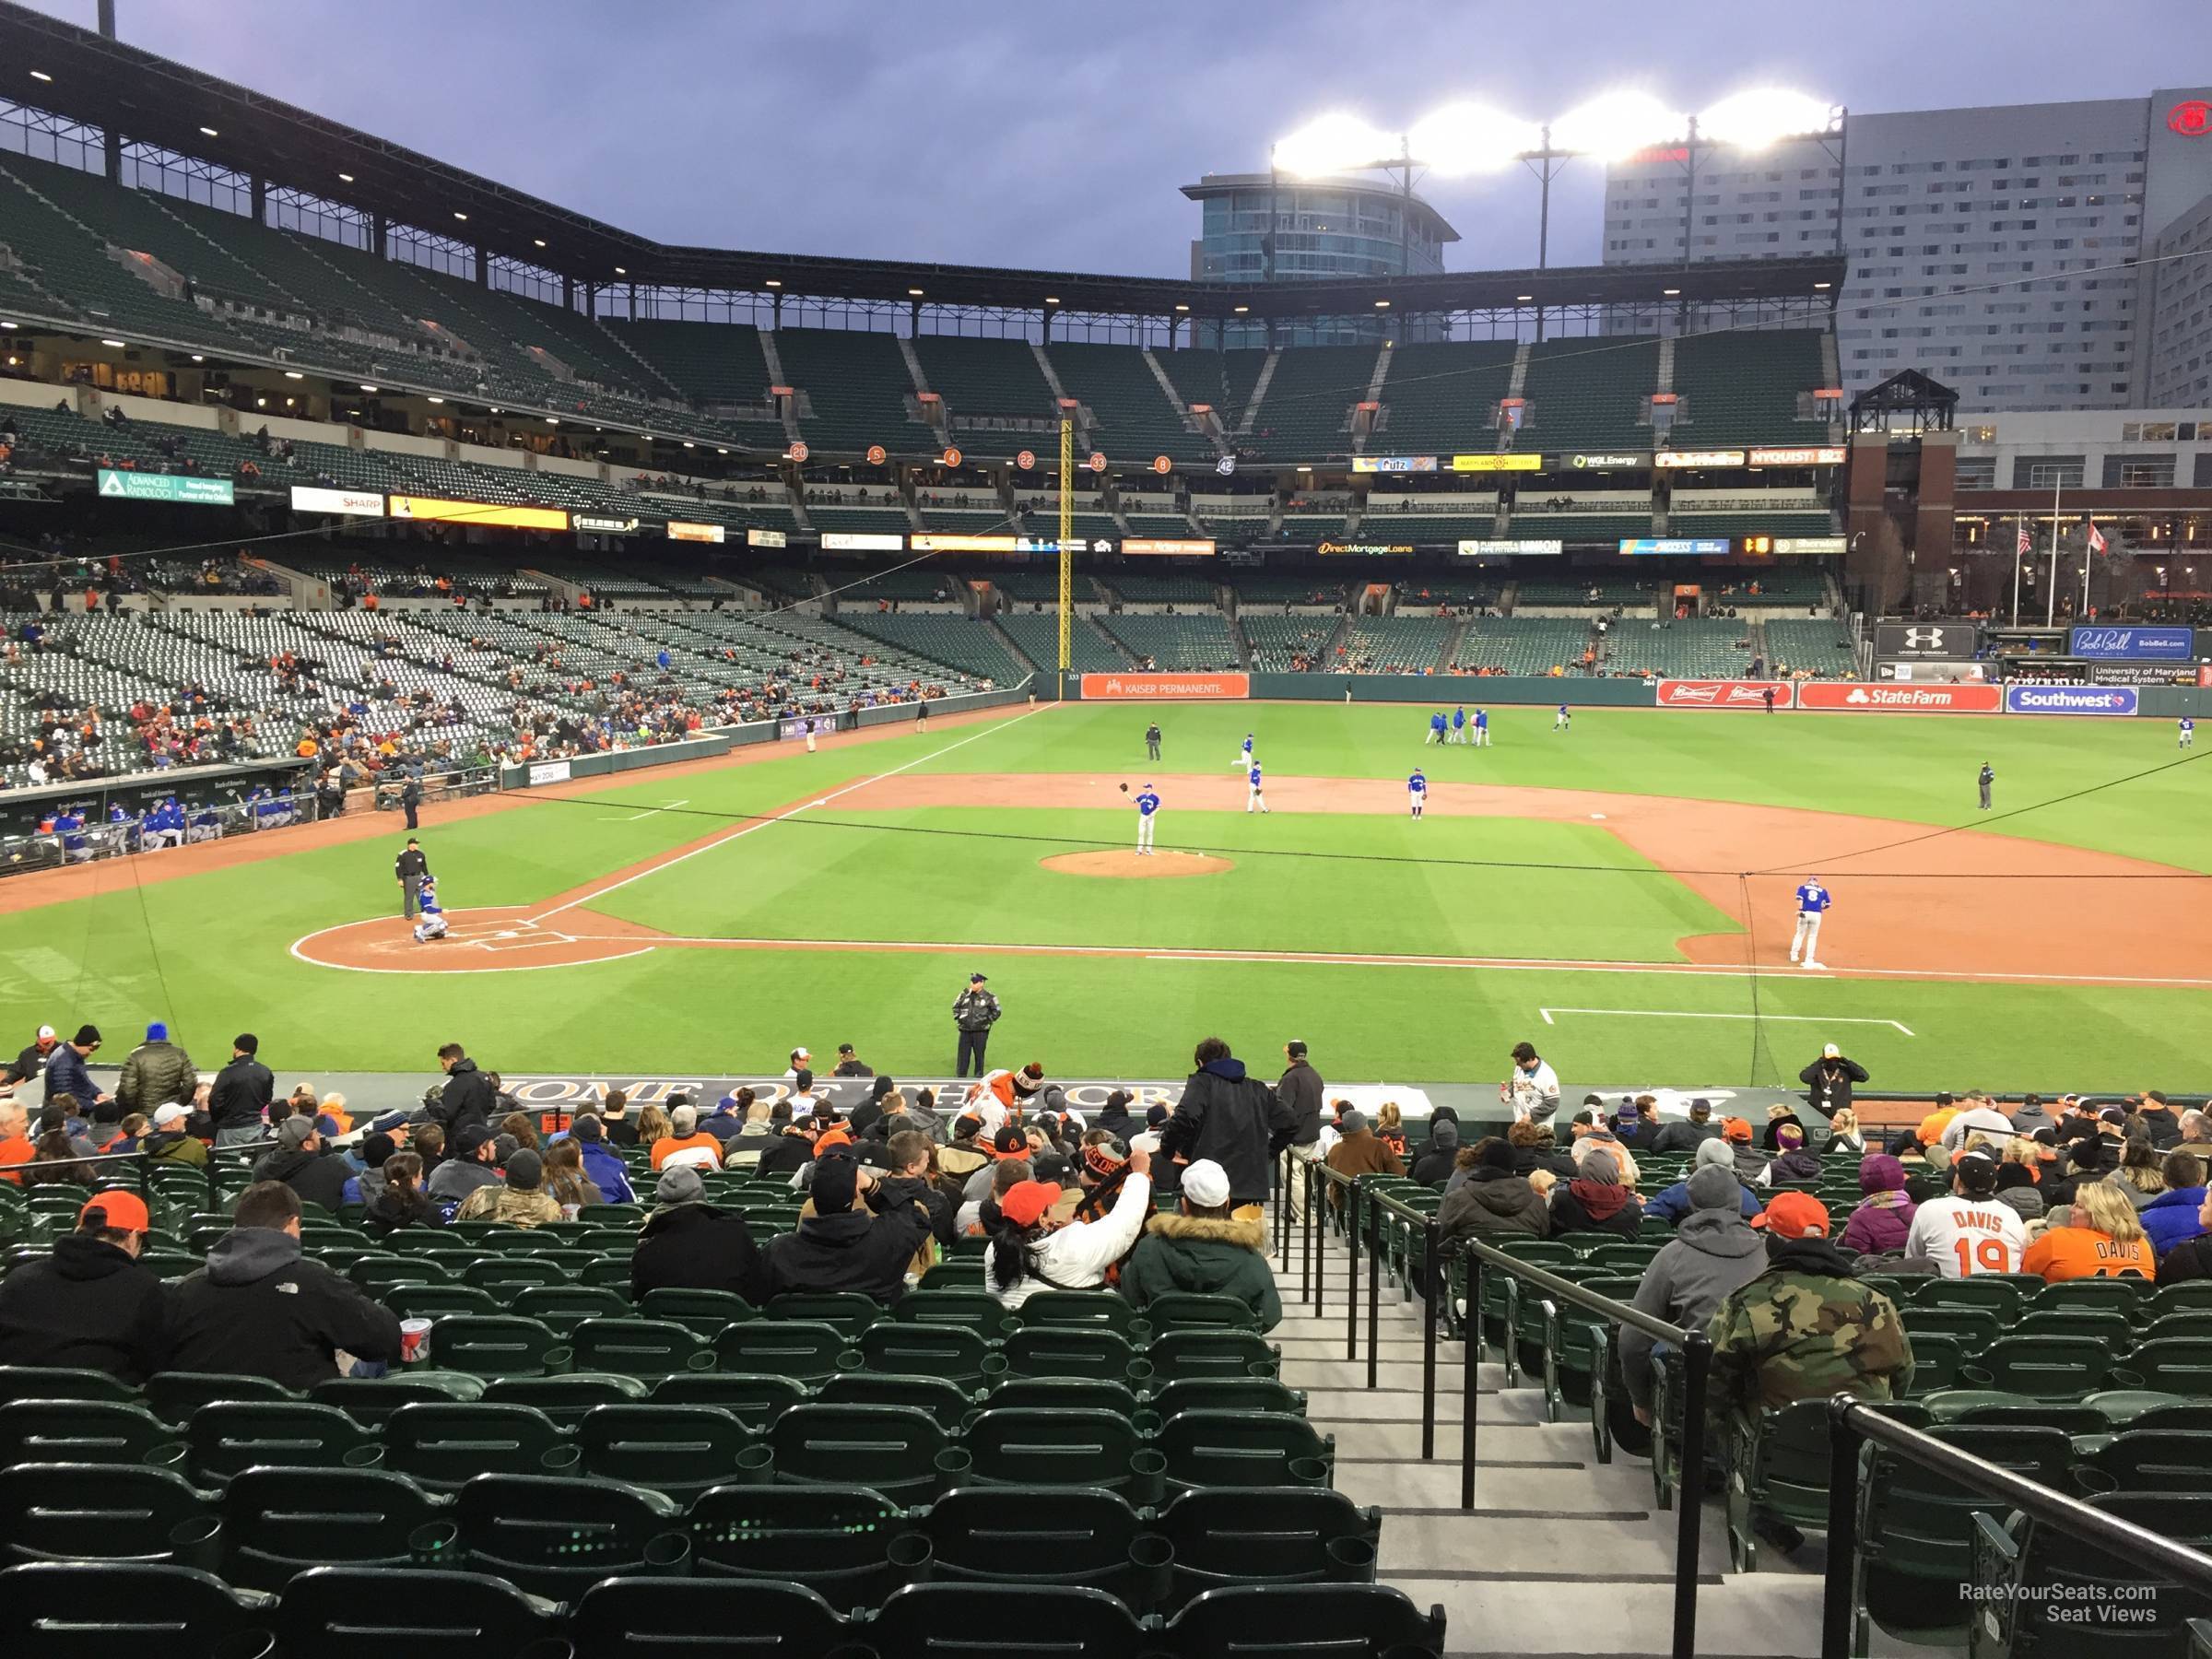 section 24, row 20 seat view  - oriole park